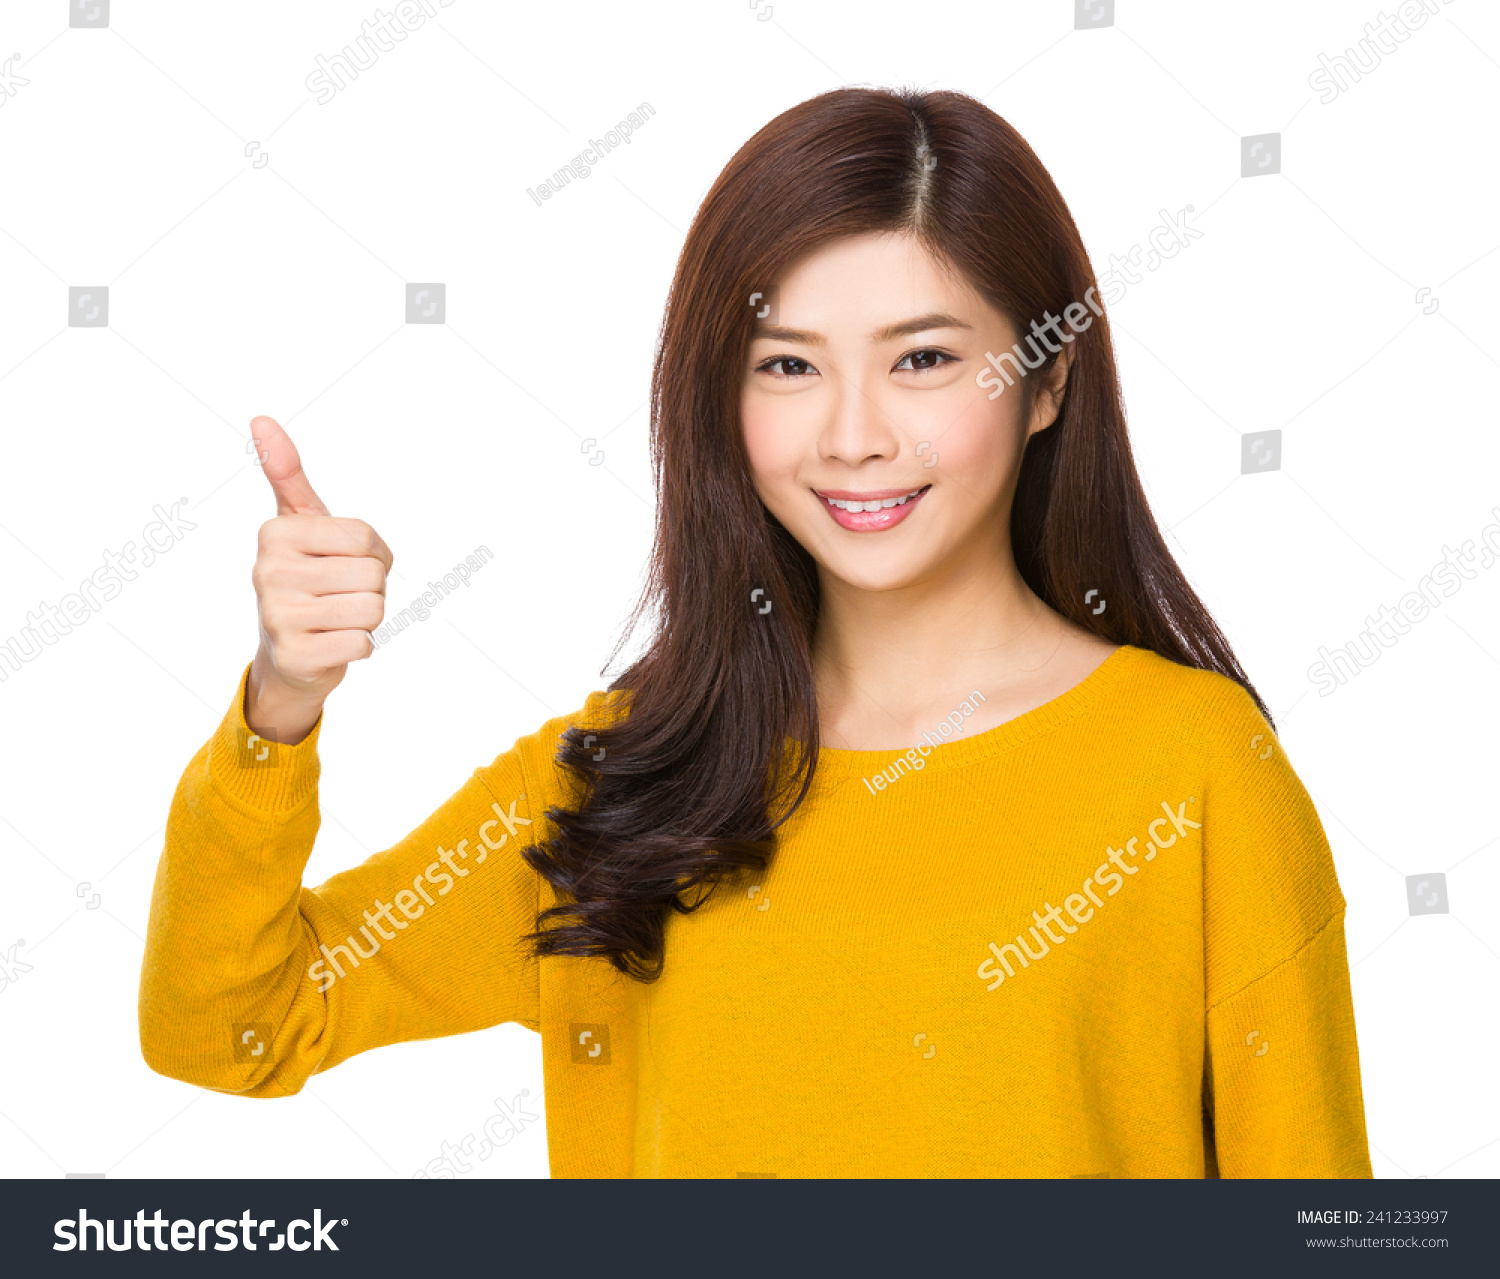 Woman with thumb up #241233997